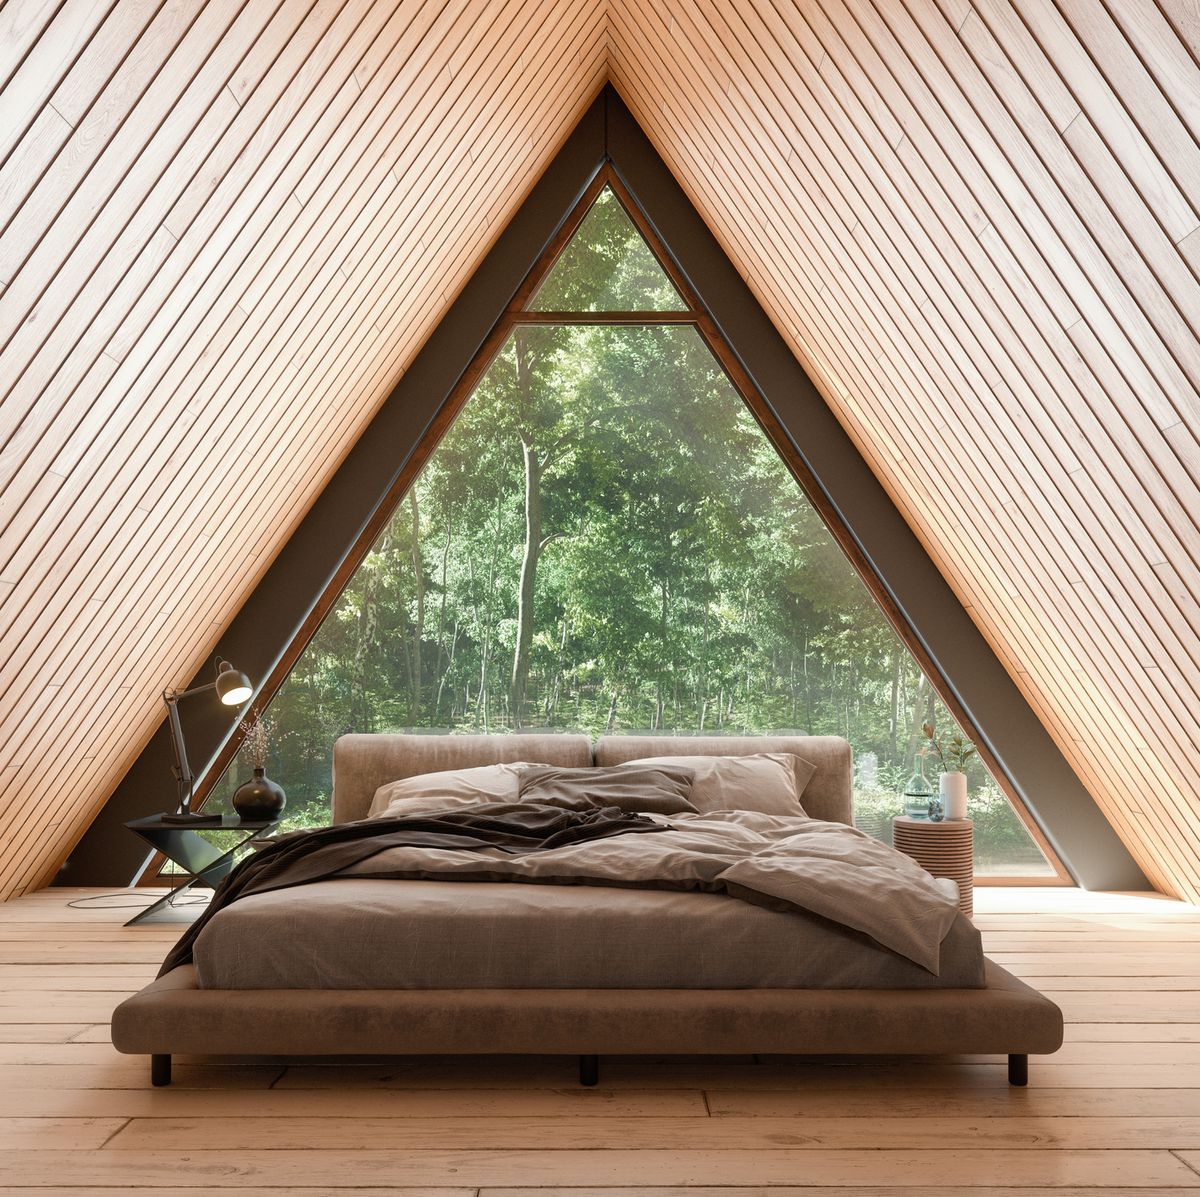 https://hips.hearstapps.com/hmg-prod/images/wooden-tiny-house-interior-with-bed-furniture-and-royalty-free-image-1700578925.jpg?crop=0.668xw:1.00xh;0.167xw,0&resize=1200:*